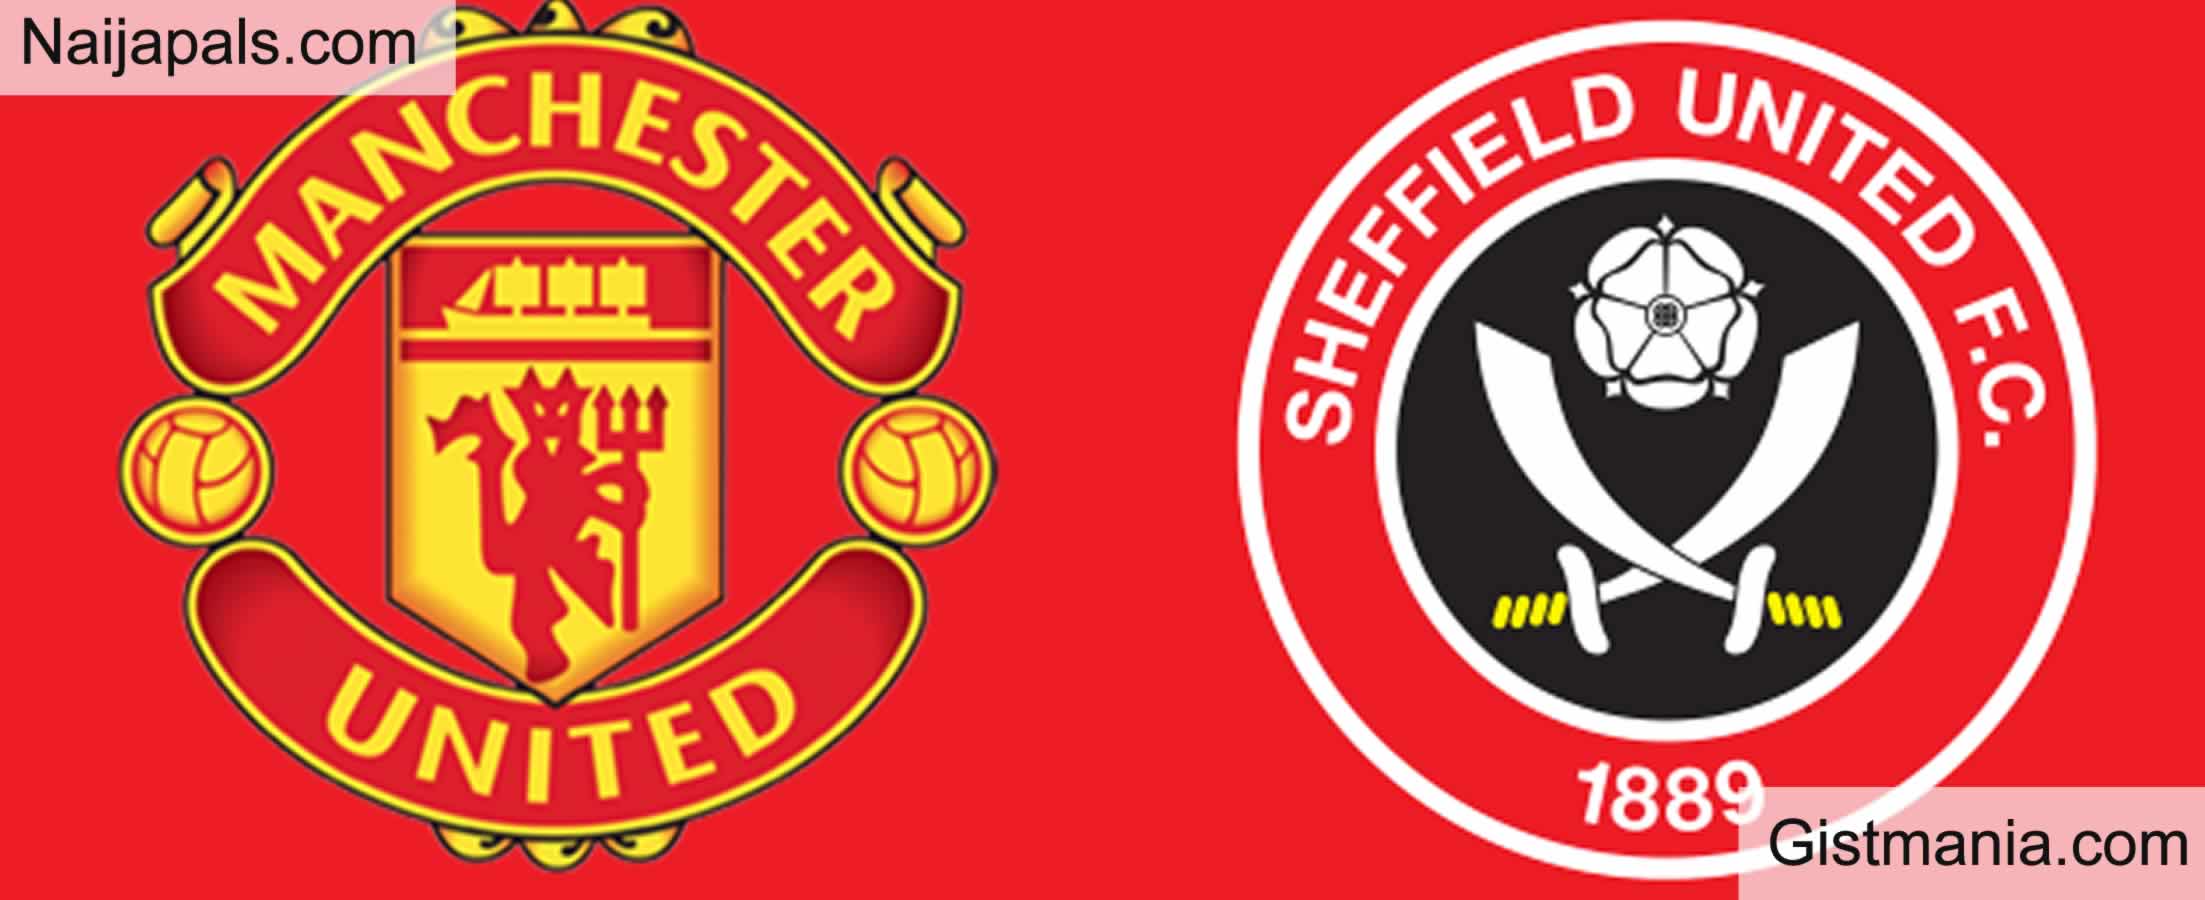 Manchester United v Sheffield: English Premier League Match,Team News,Goal Scorers and Stats